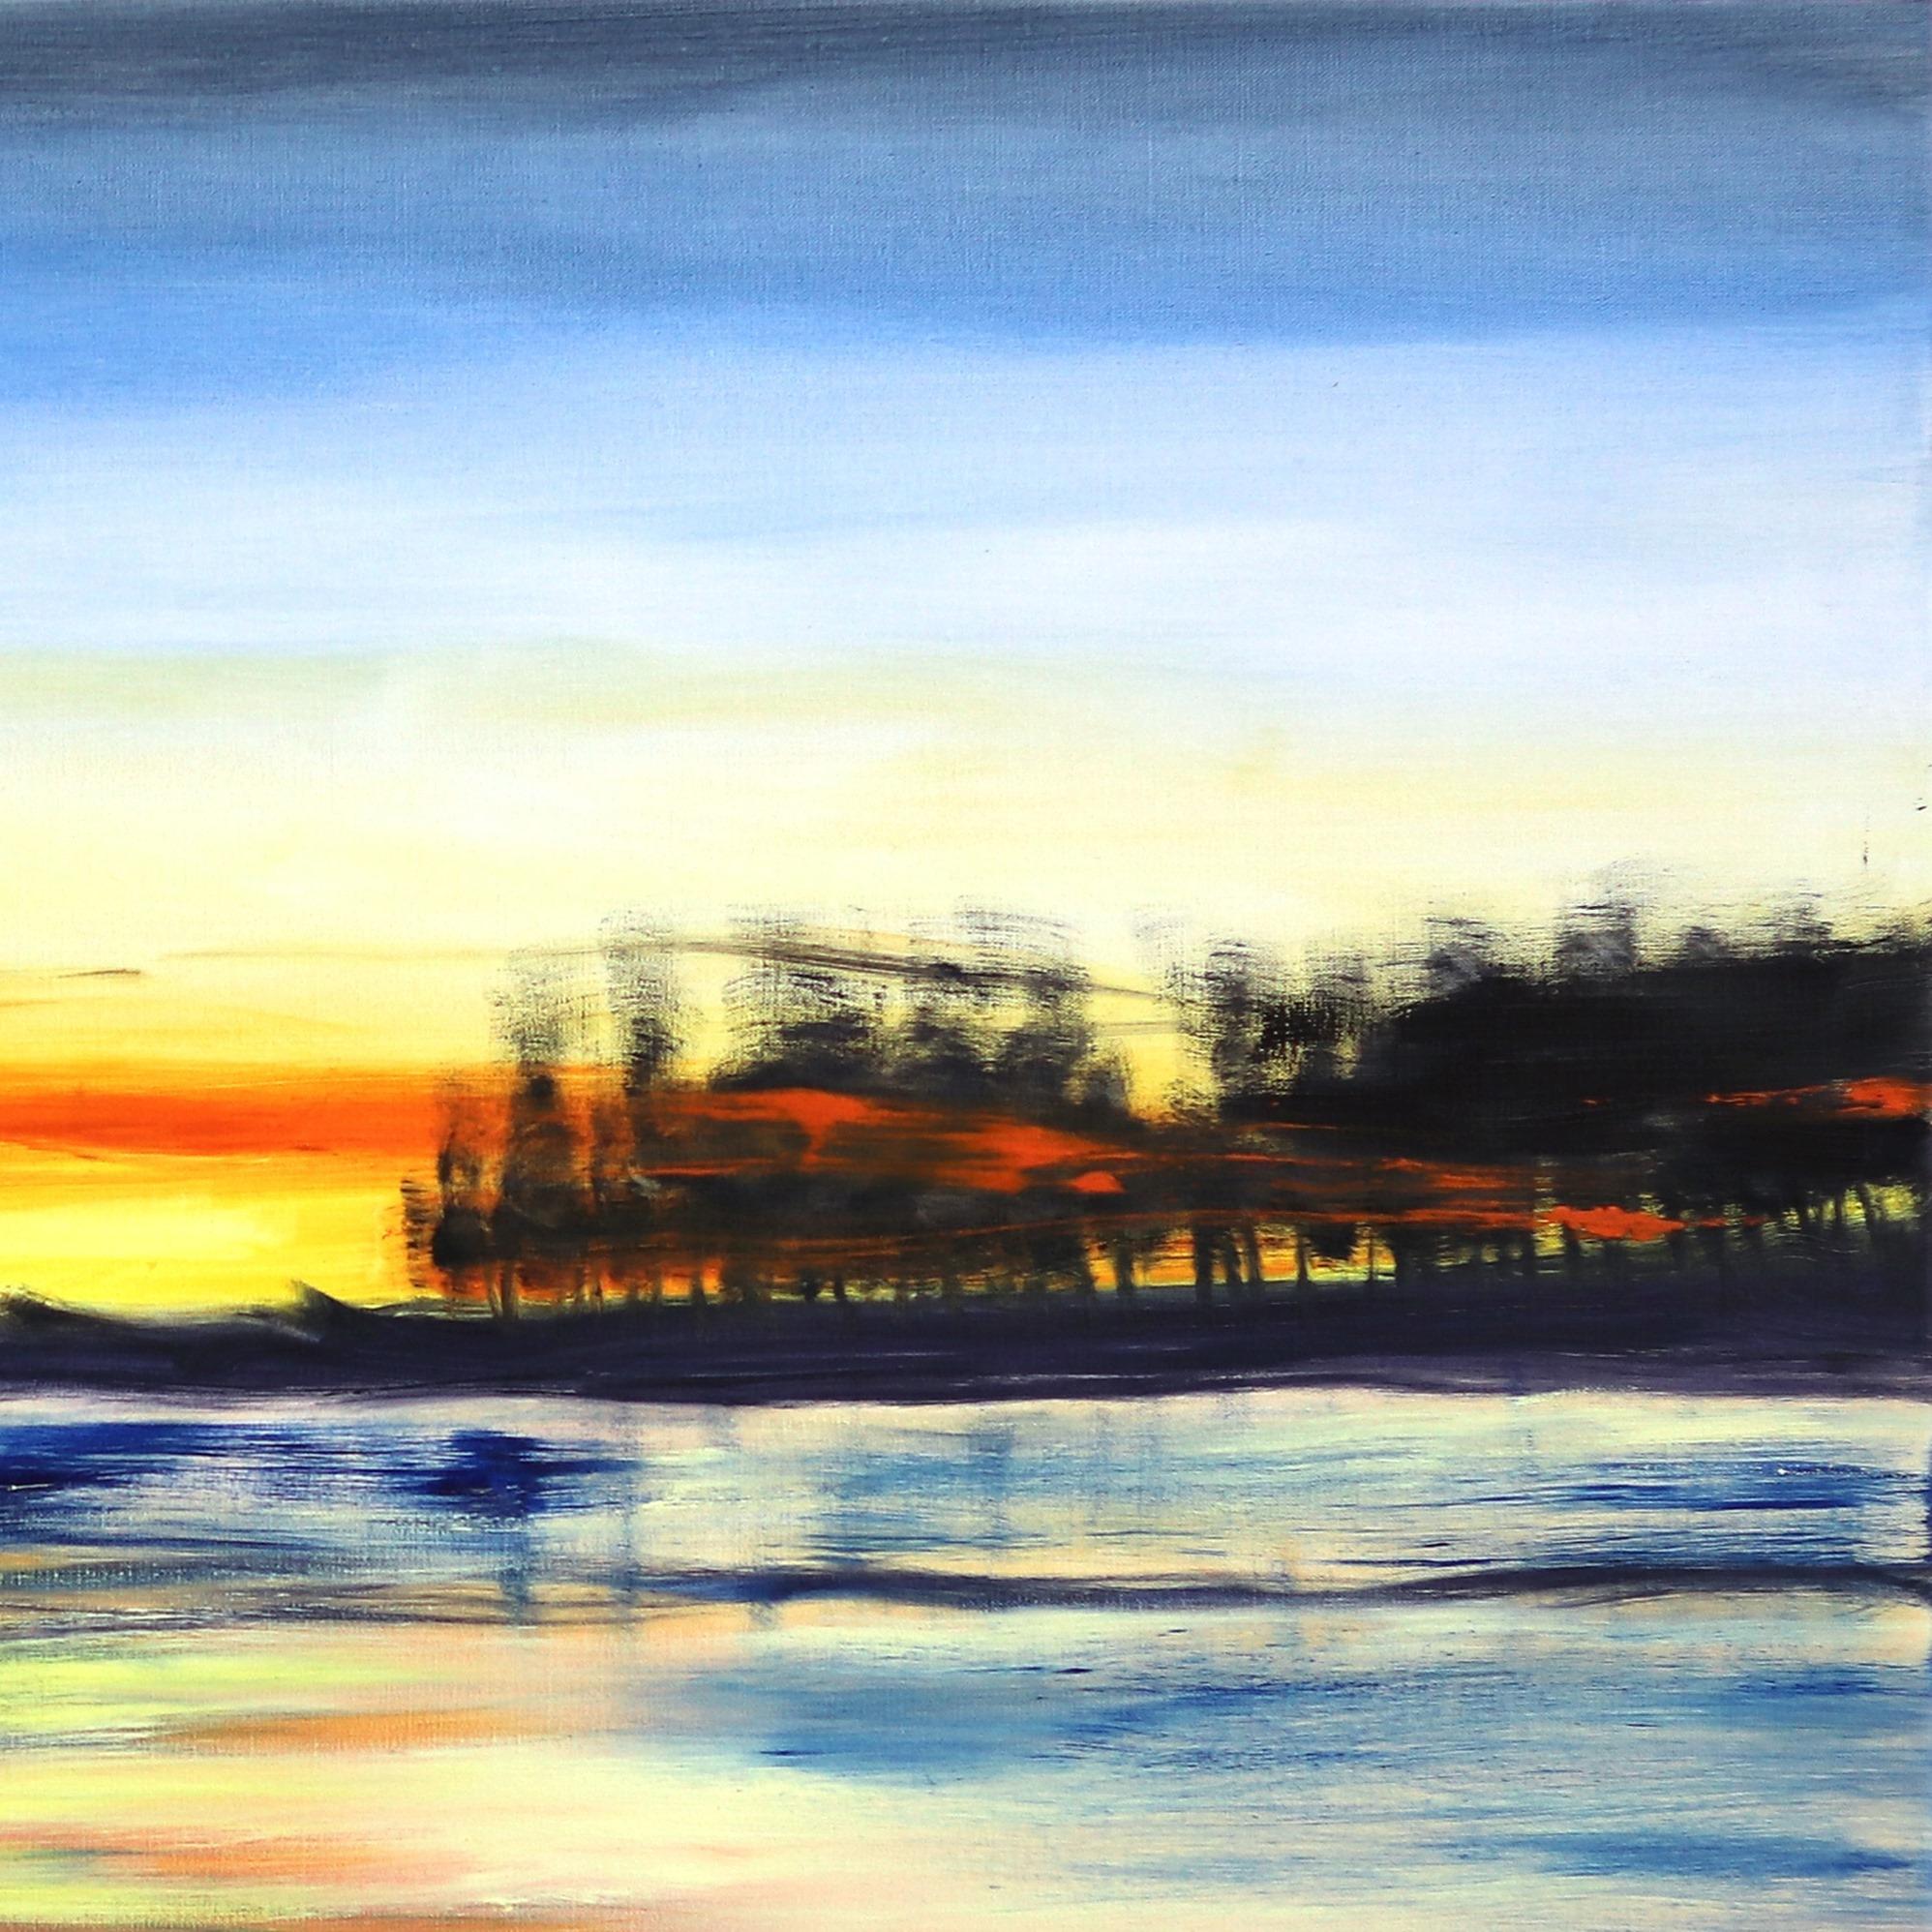 Shoreline III - Large Original Abstract Blue and Yellow Landscape Oil Painting - Beige Landscape Painting by Bettina Mauel